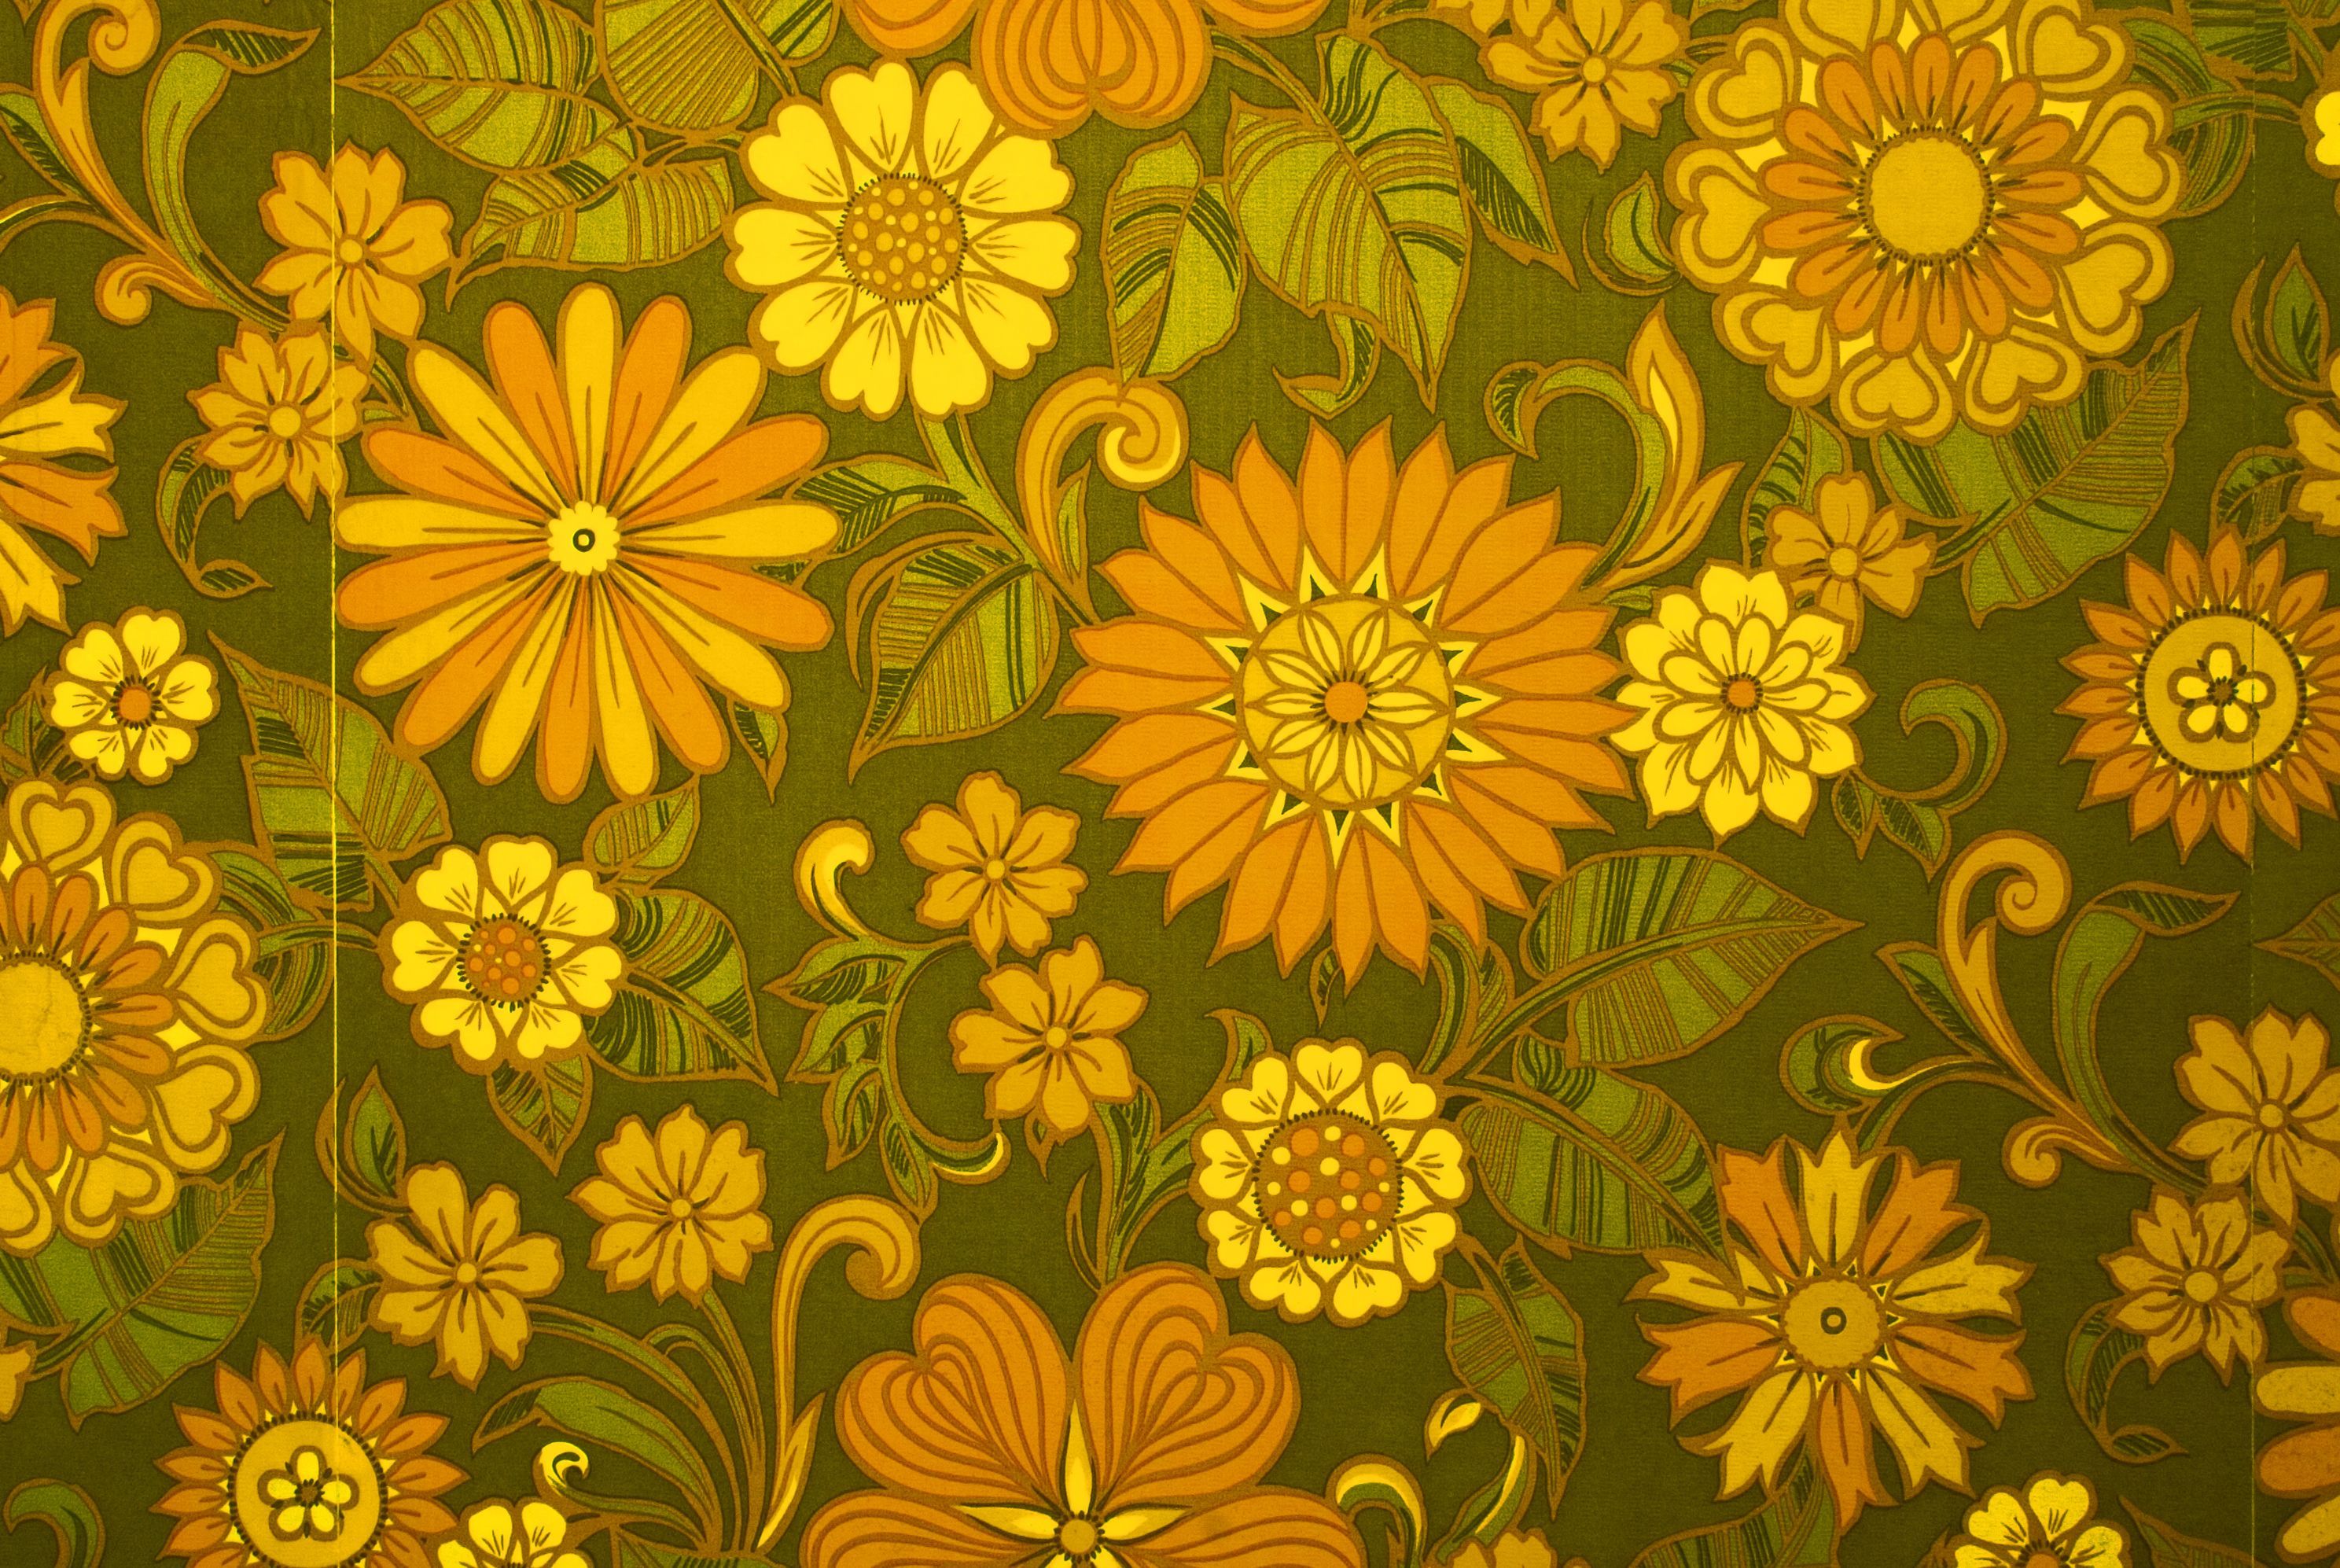 70s Style Wallpaper Free 70s Style Background